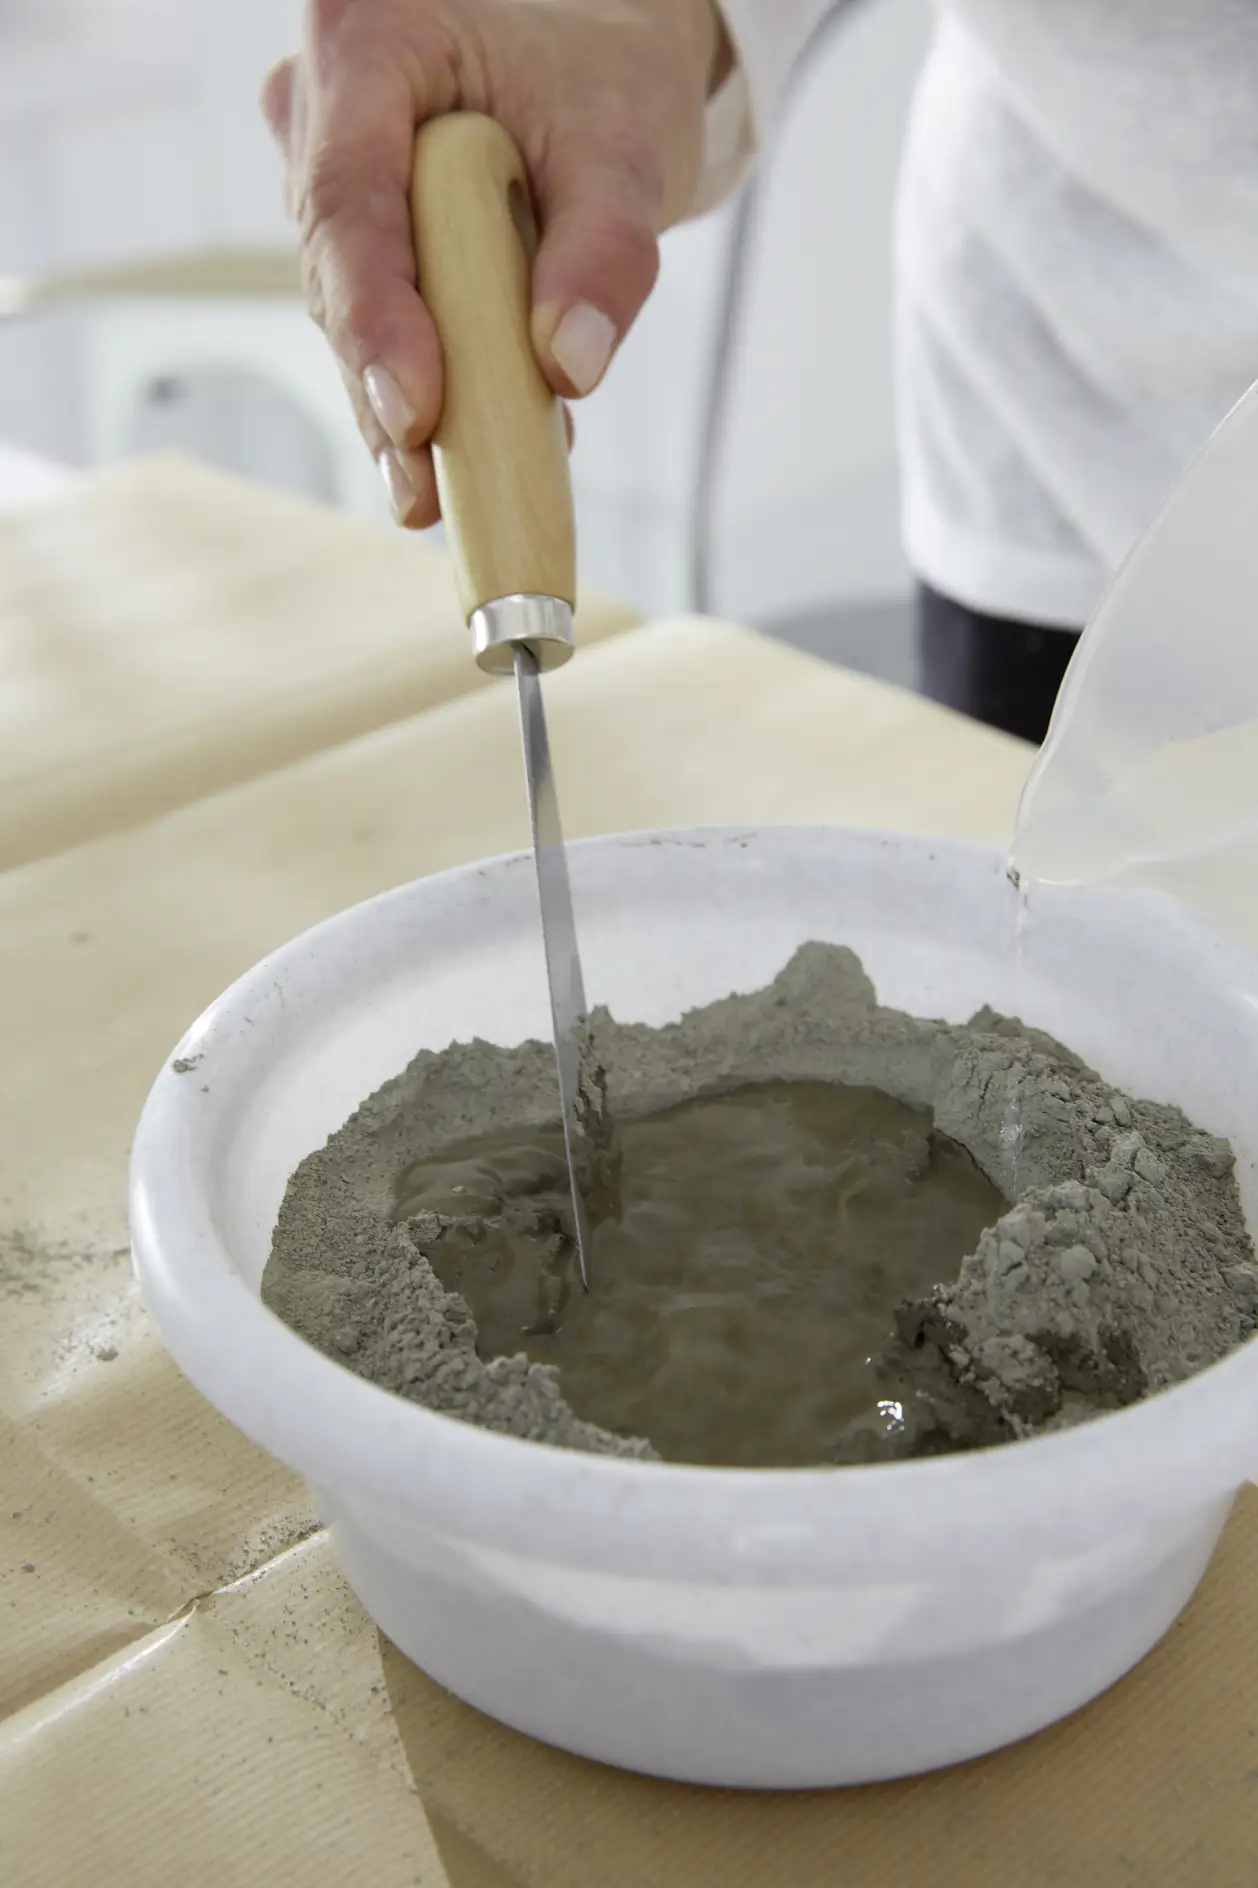 Mix the quick-drying mortar with water.